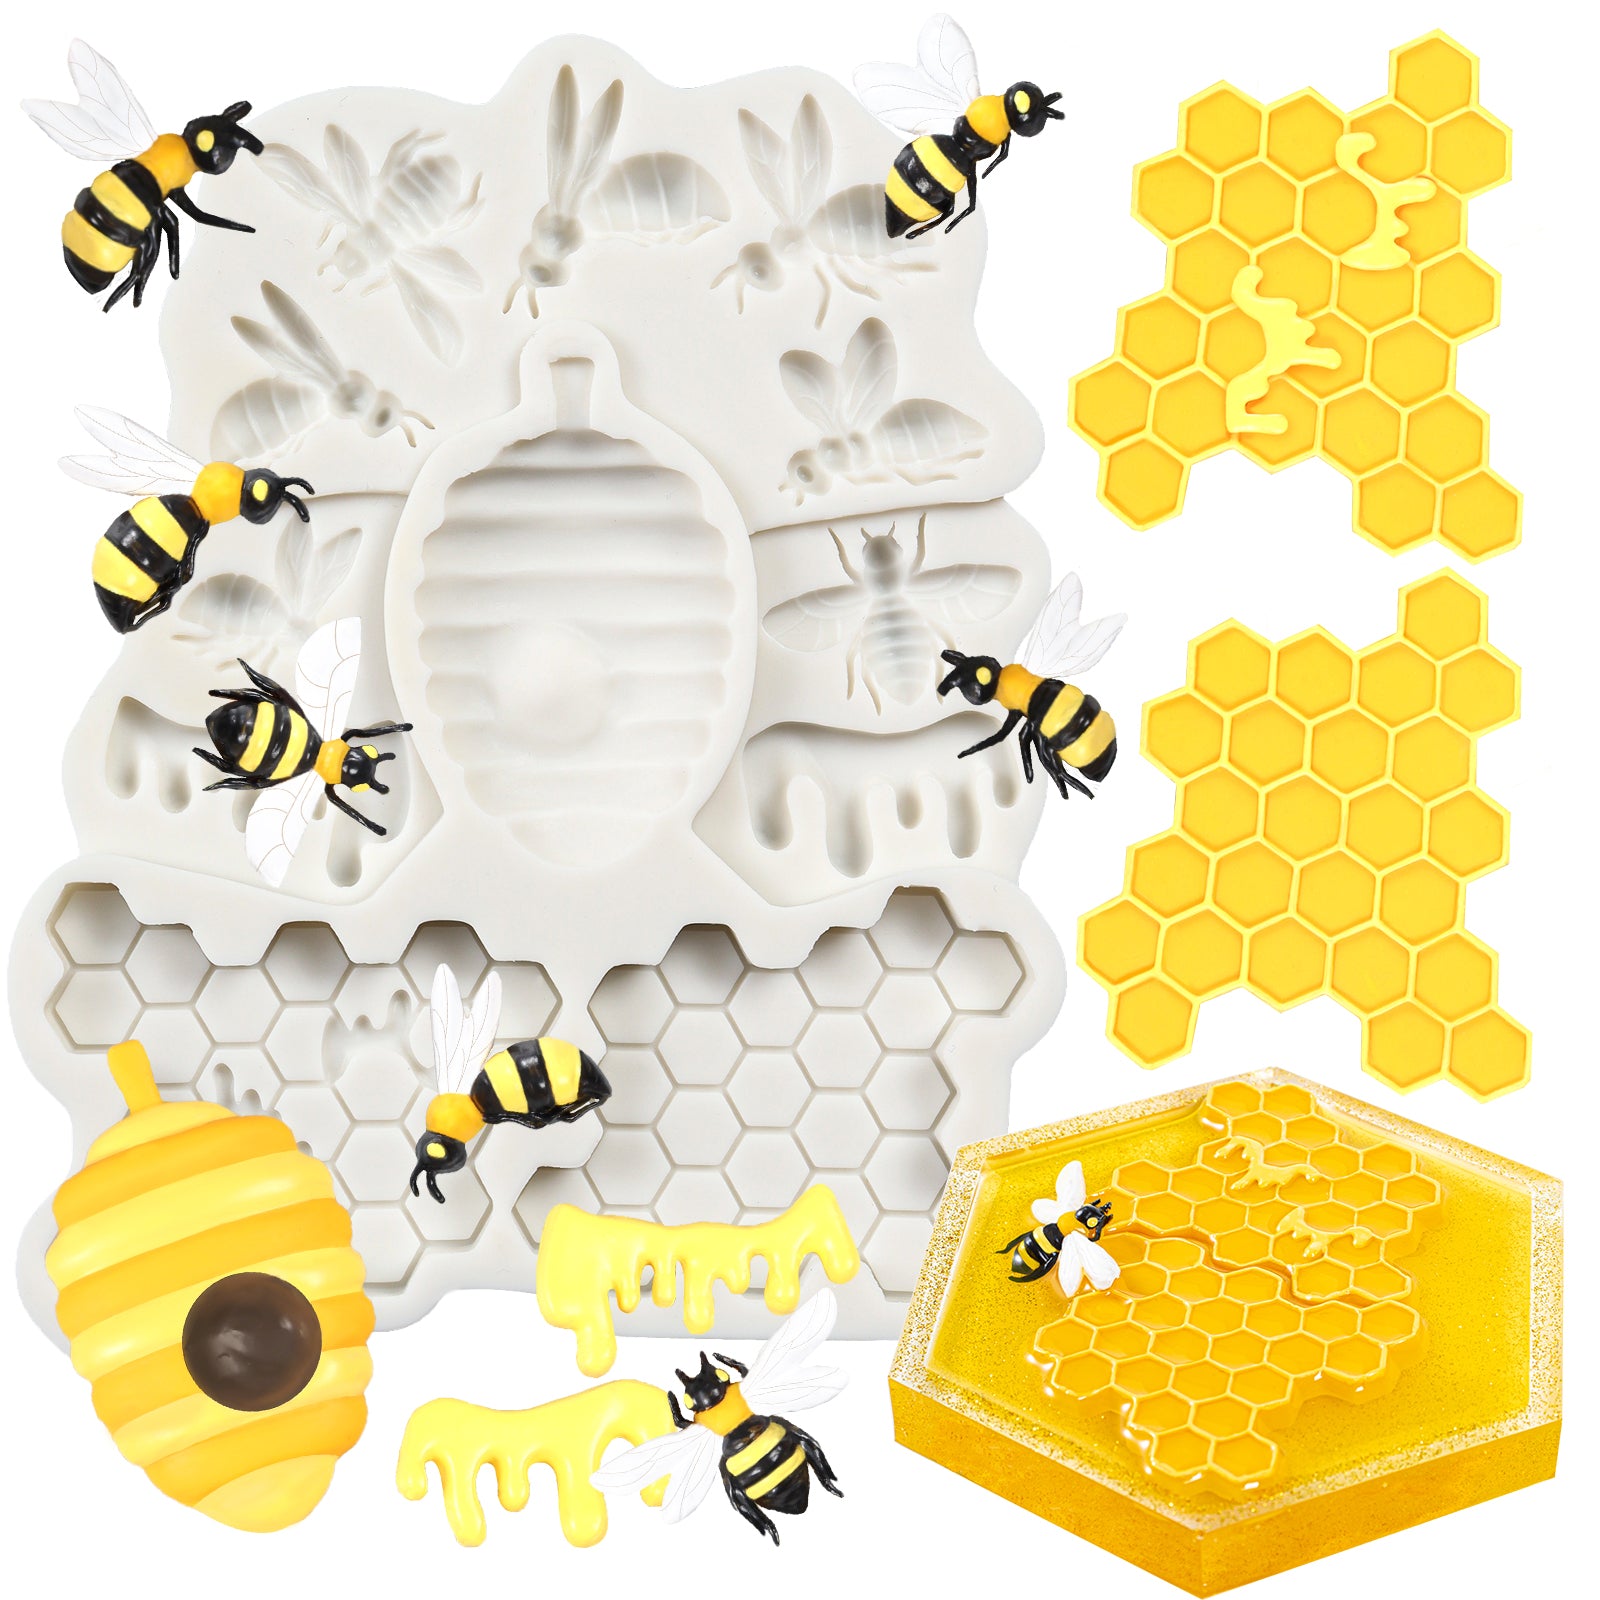 Mold Silicone Honeycomb, Silicone Mold Honey Comb